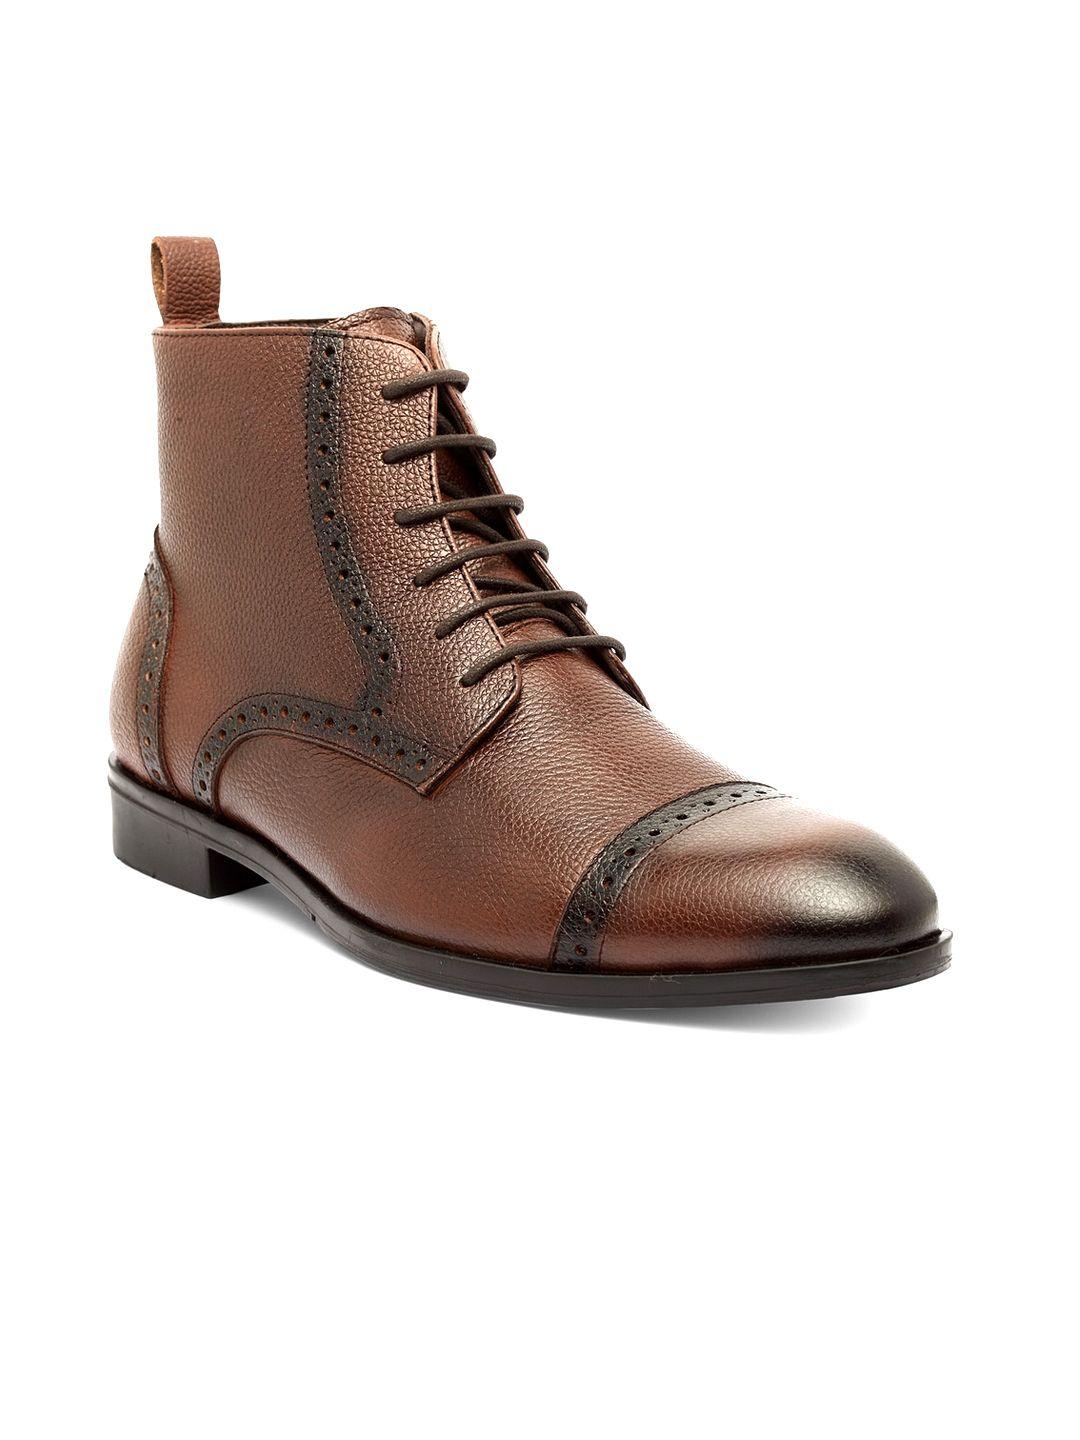 teakwood leathers men brown textured leather boots